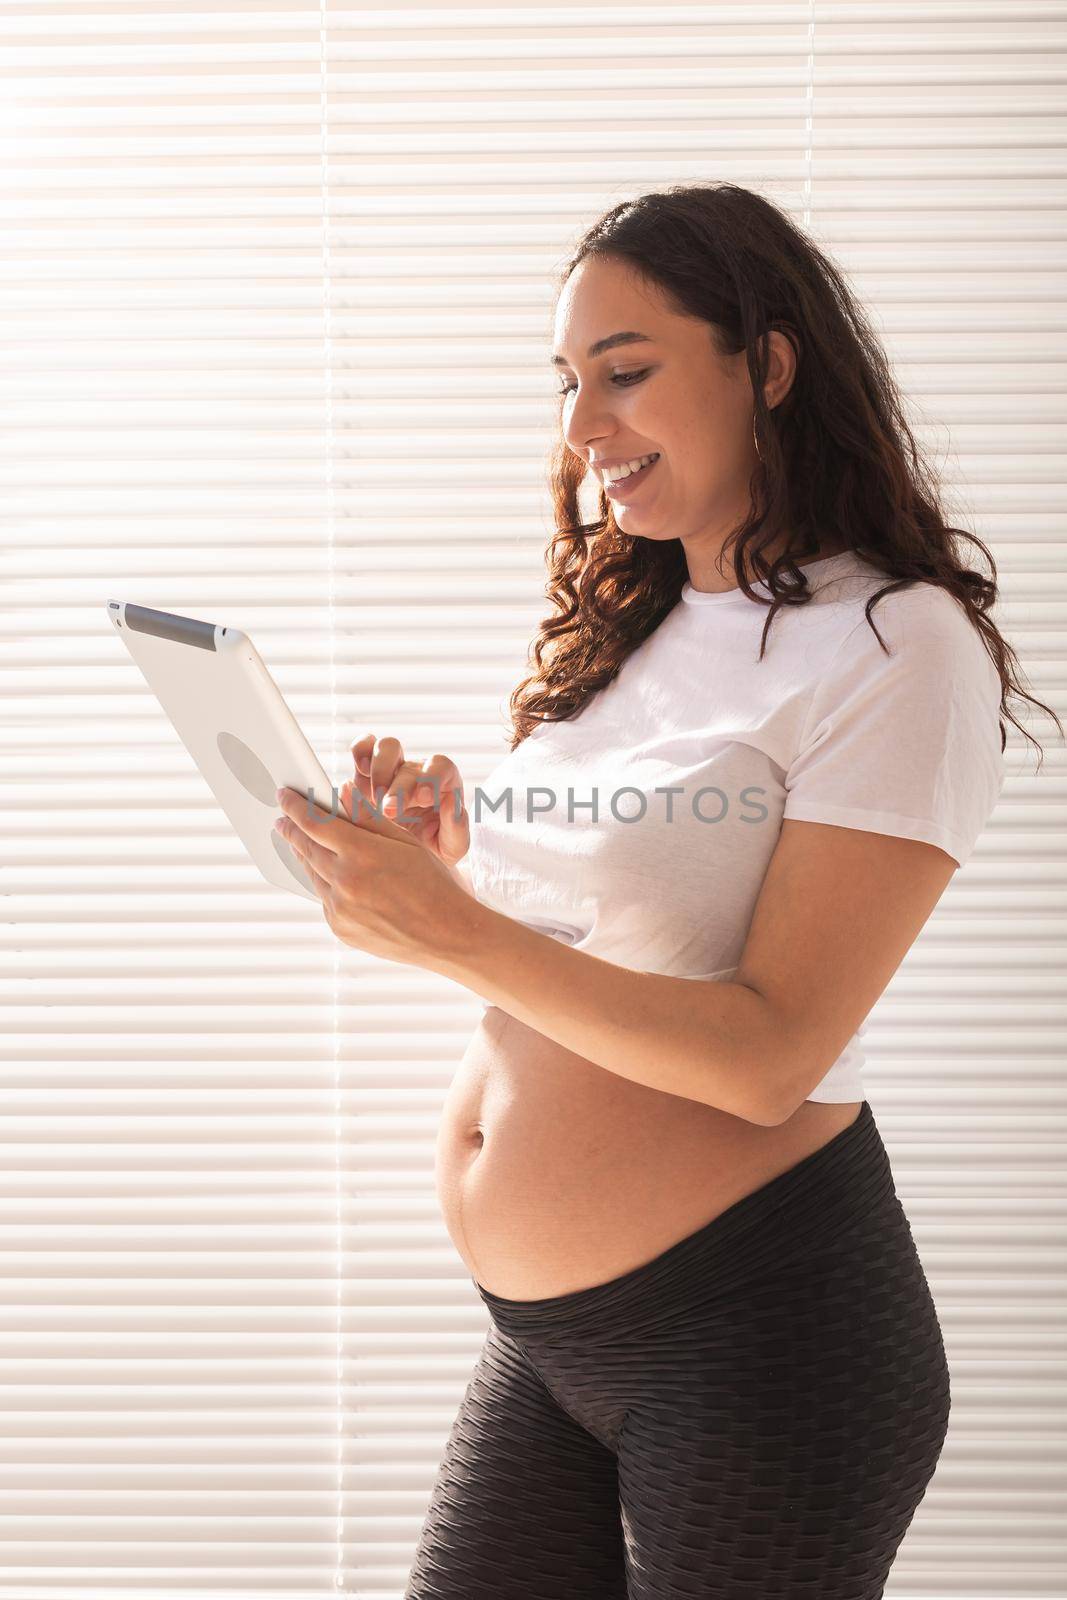 Happy pregnant young beautiful woman talking to her husband using video connection and tablet. Communication and positive attitude during pregnancy